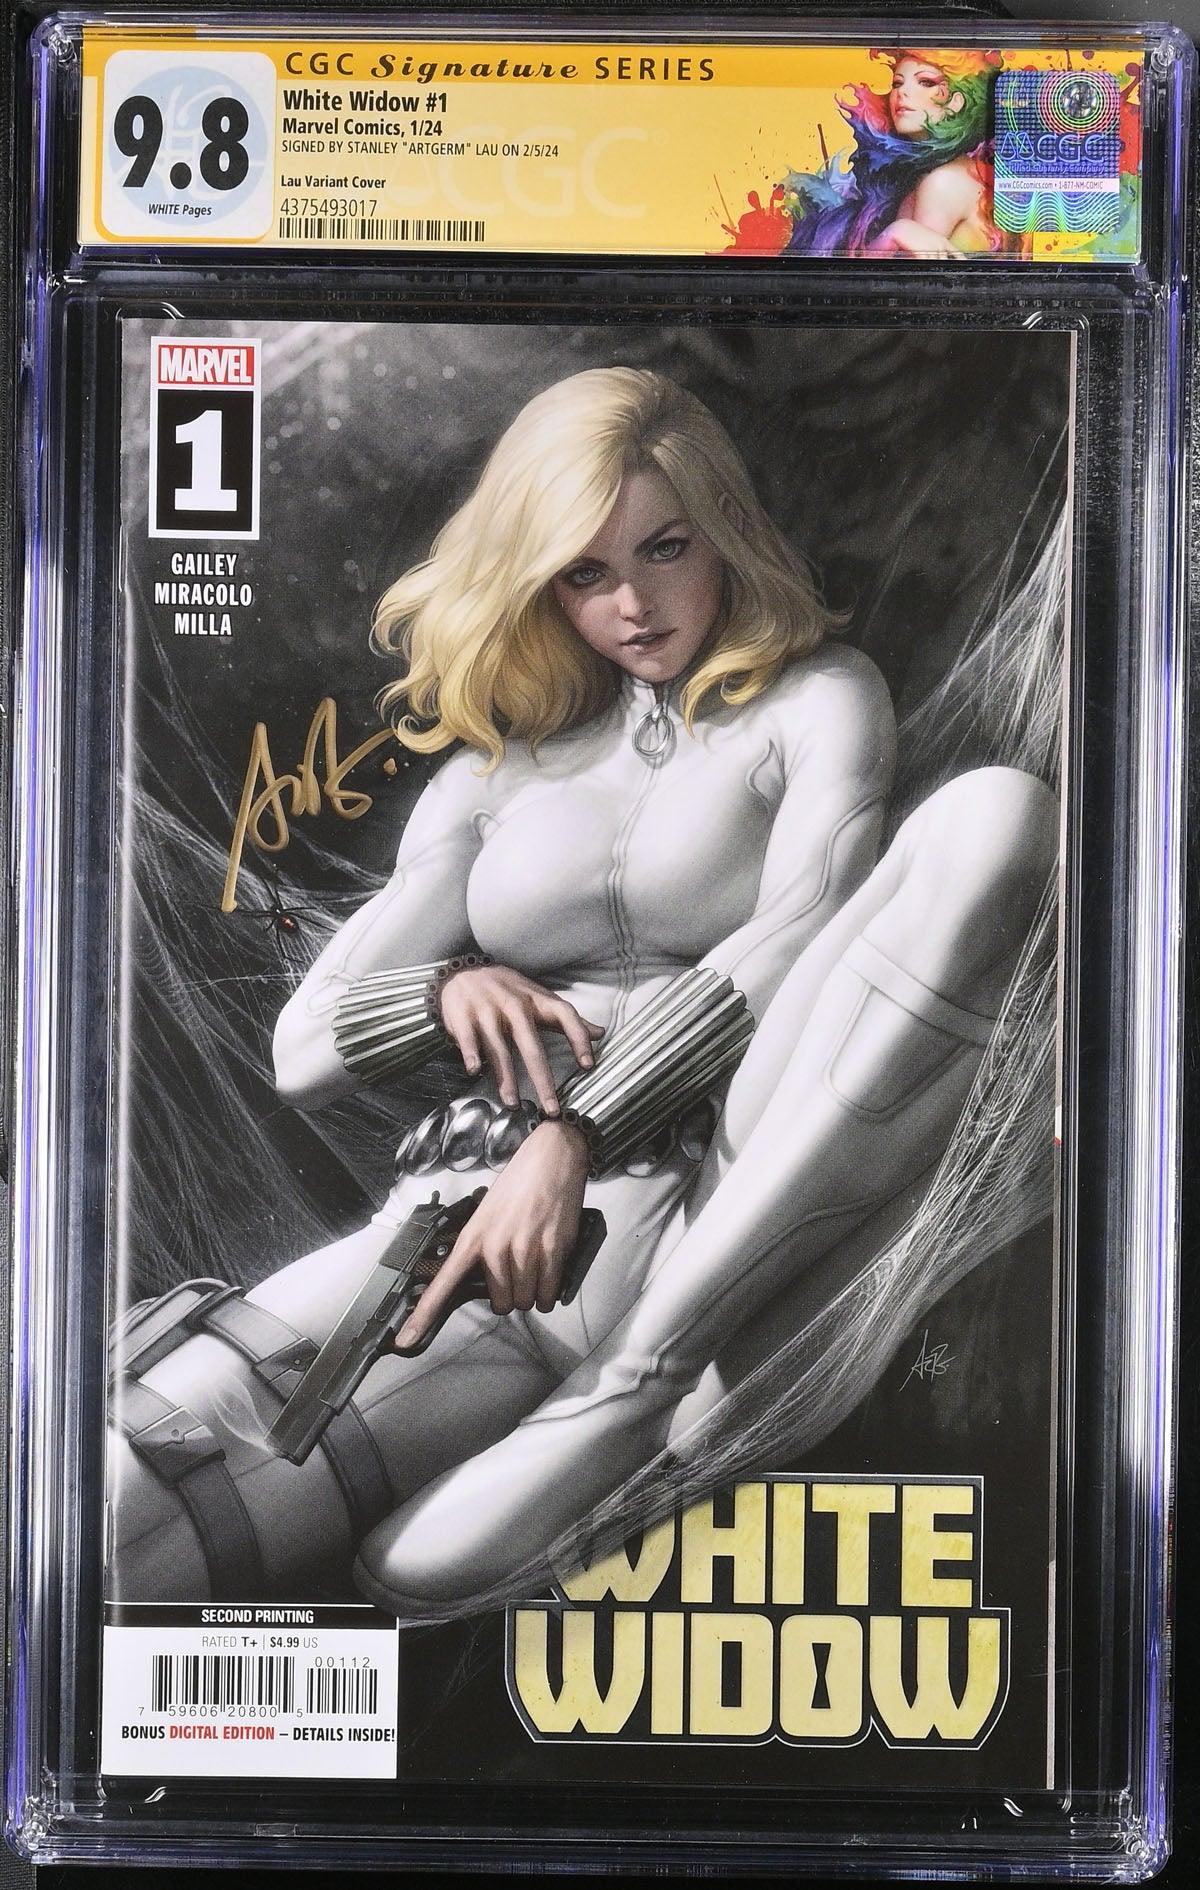 CGC WHITE WIDOW #1 LAU VARIANT (9.8) SIGNATURE SERIES - SIGNED BY STANLEY "ARTGERM" - Kings Comics